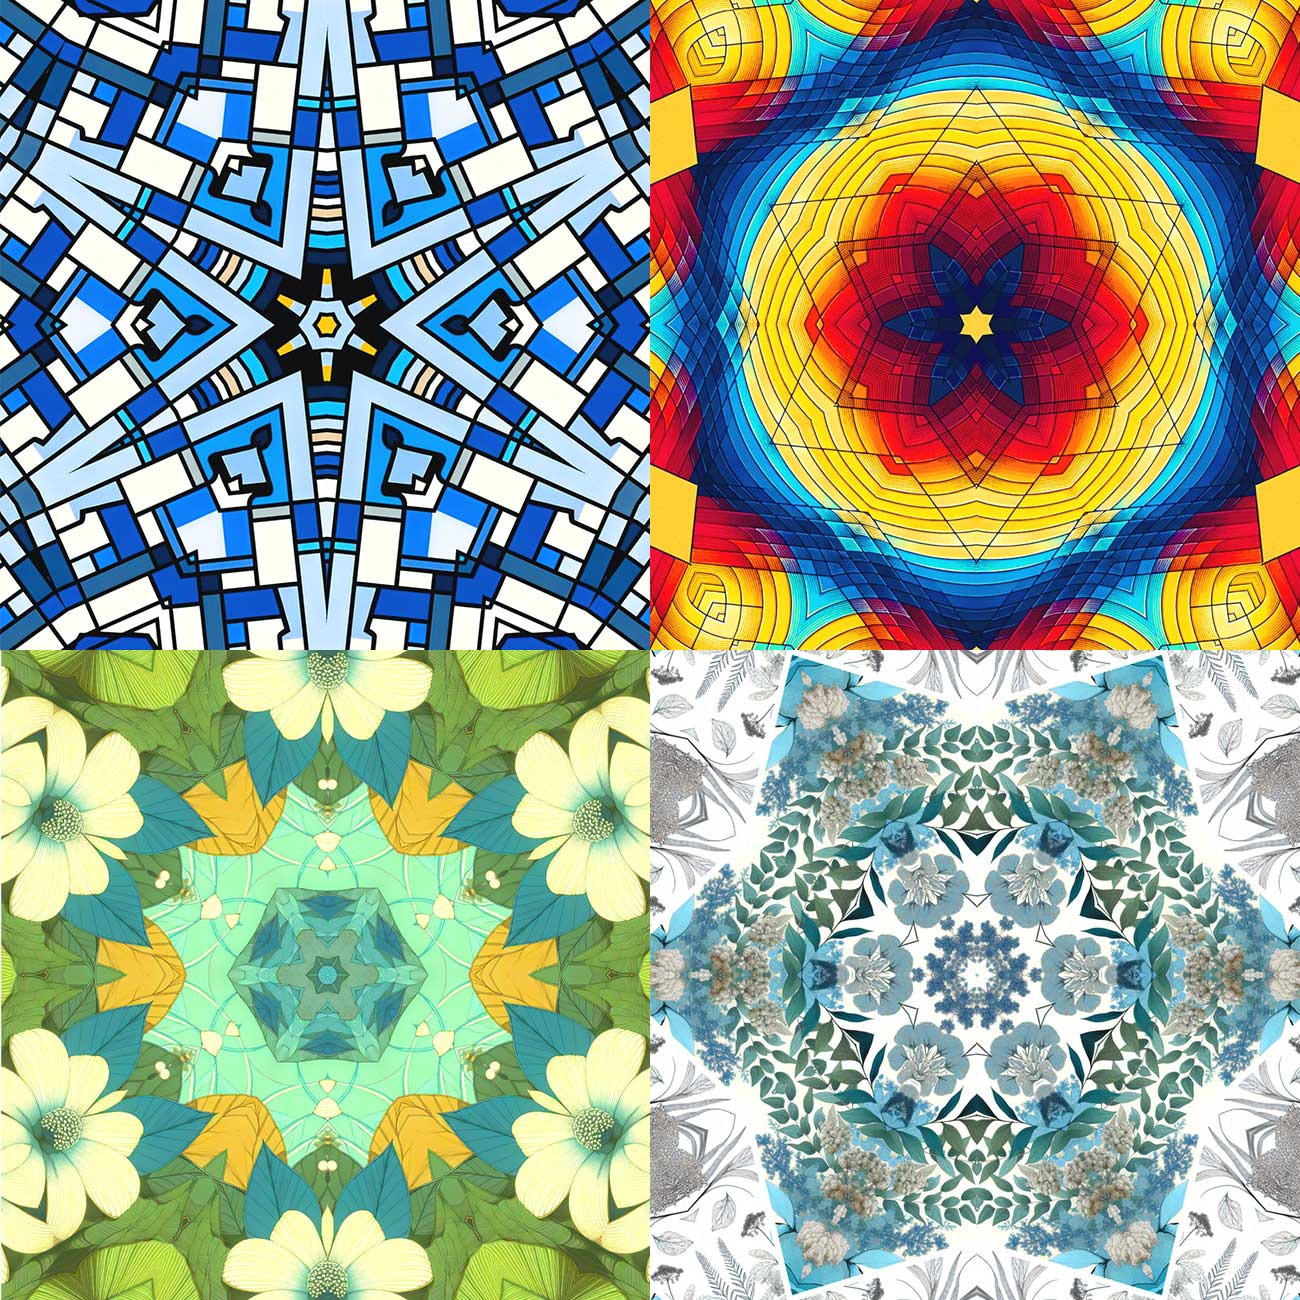 Example colours and patterns to fit different personalities